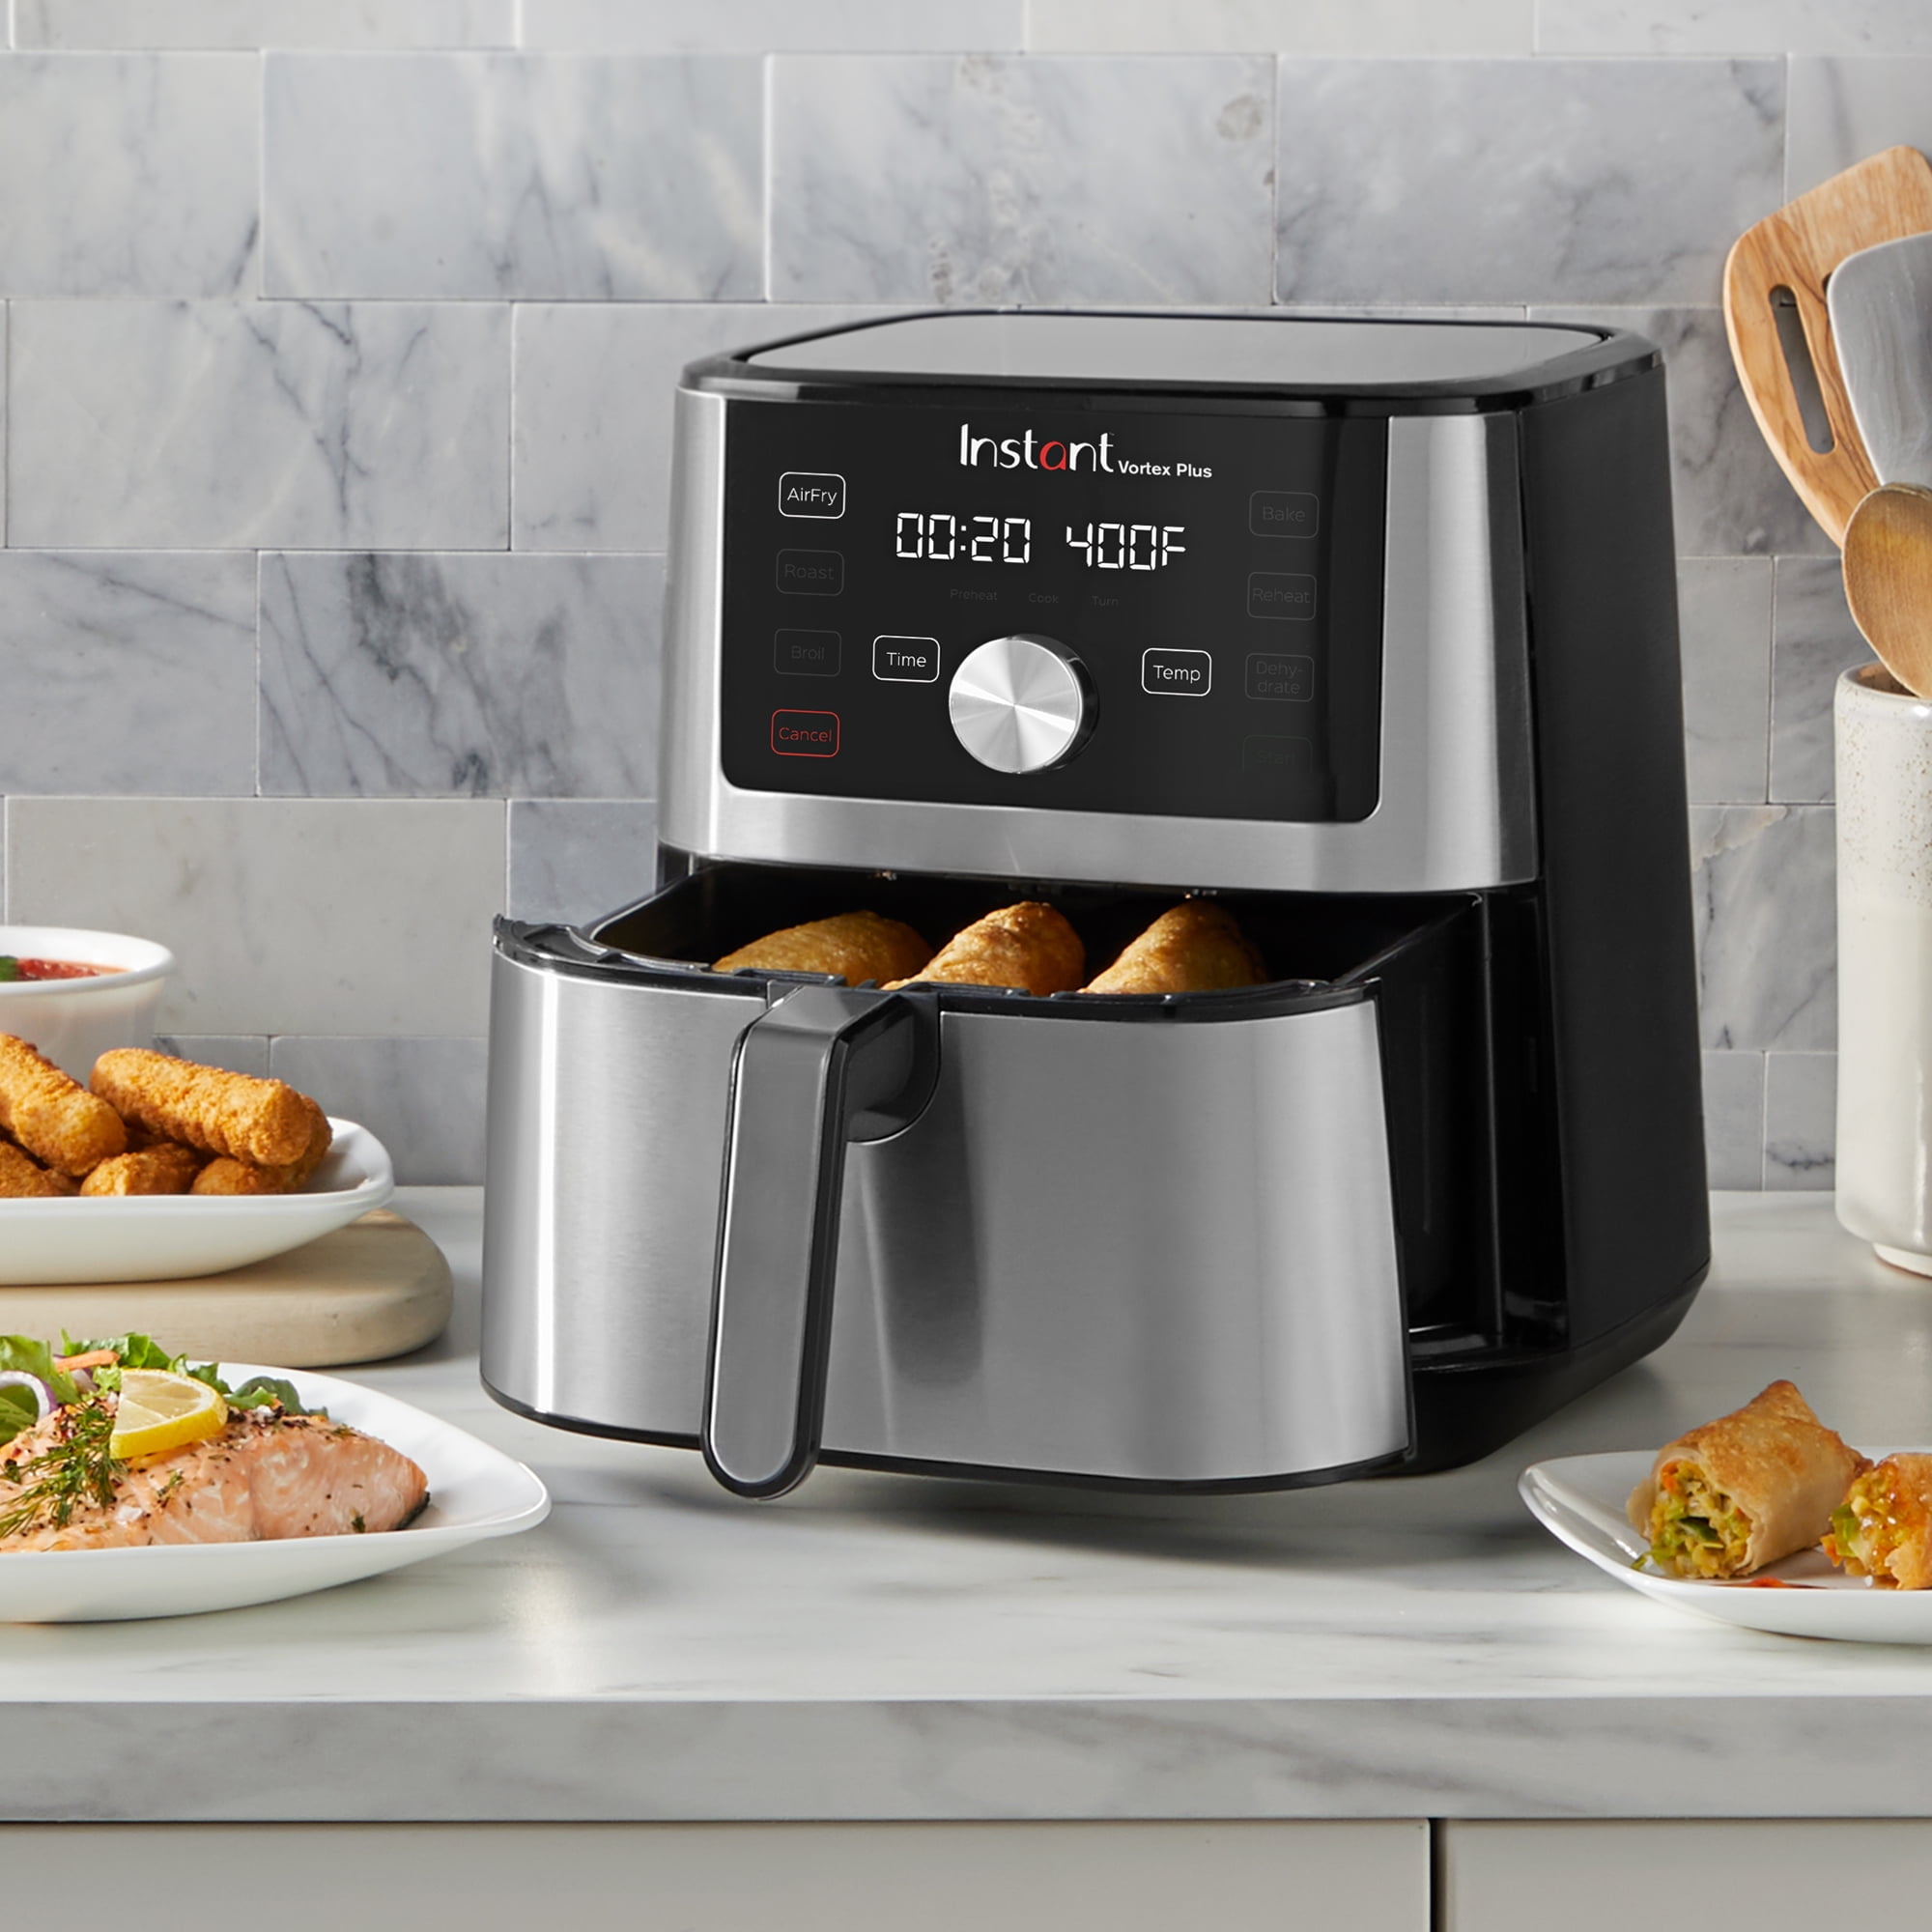  Self-Cleaning Air Fryer 5 Quart with 360 Visibility, Non-Toxic,  BPA-Free, 400F Vortex for Even Cooking, 6-in-1 Functions, Rotisserie,  Roast, Bake, Dehydrate, Vortex Air Fryer, Teflon Free : Home & Kitchen